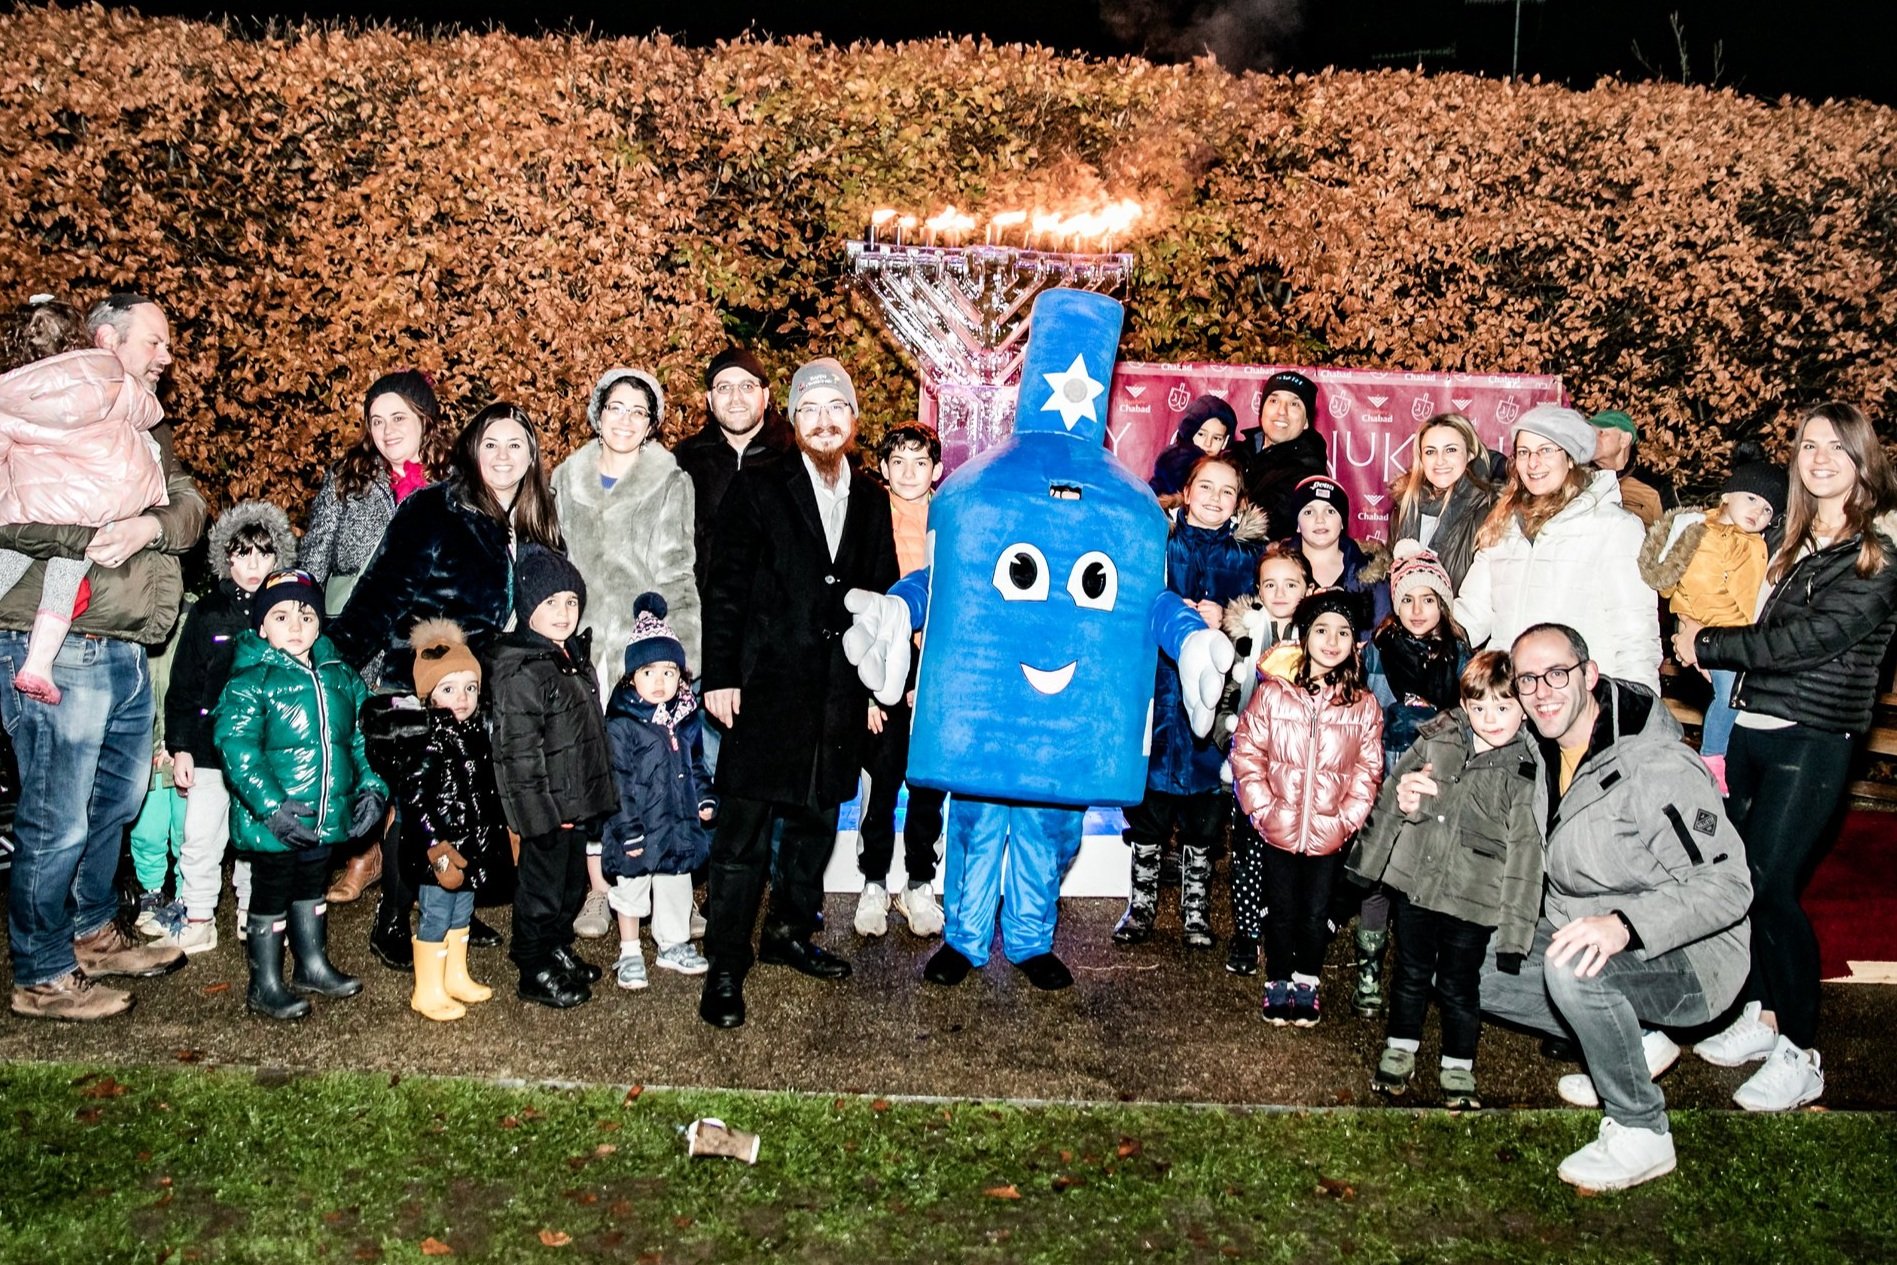  Bushey Chabad   Where Community Comes to Life    Get involved  